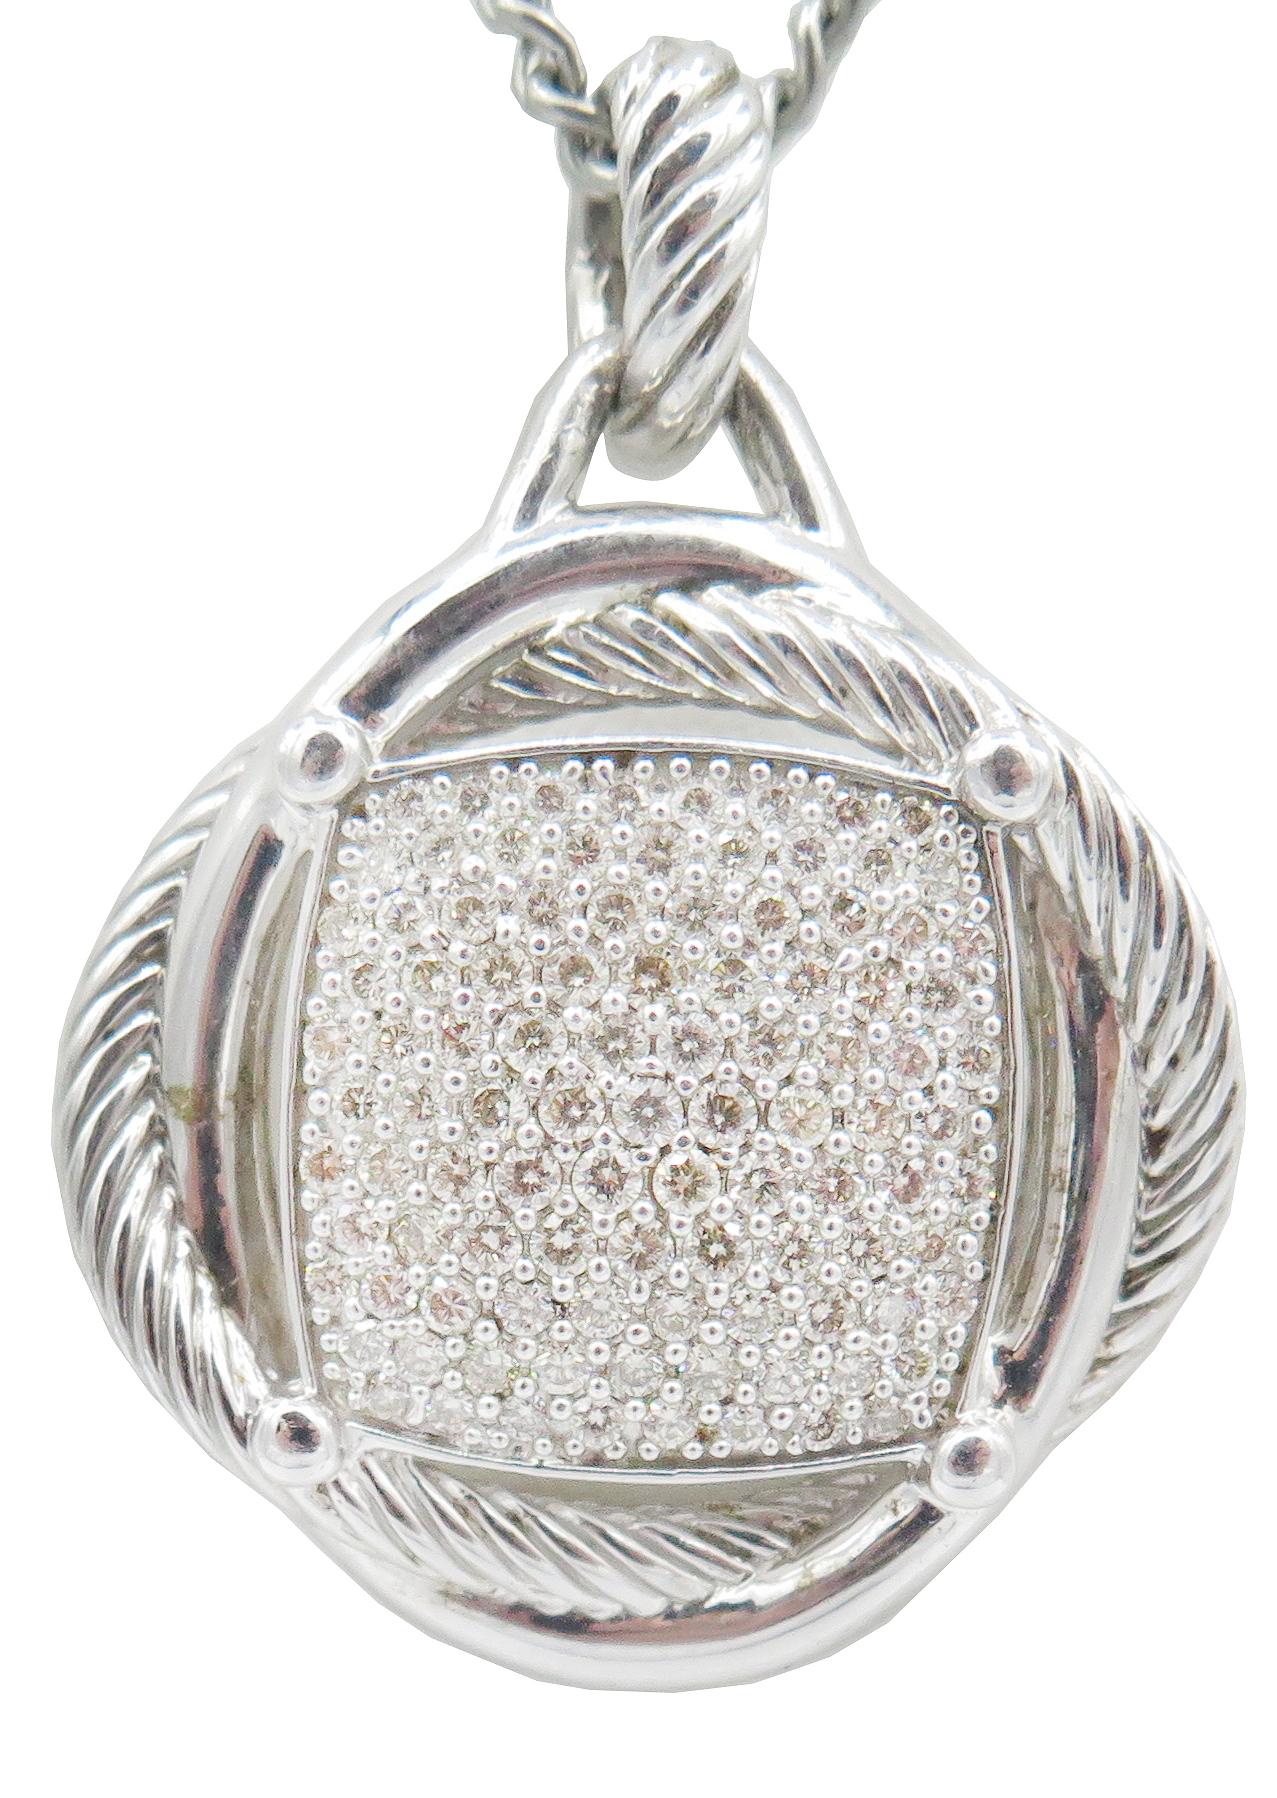 David Yurman Infinity Diamond Pendant, distinctive style and timeless beauty, A center square covered in 1.47cts of pave diamonds, is set in a 925 sterling silver setting. A part of the Infinity Collection, the pendent measures 1.47 inches in